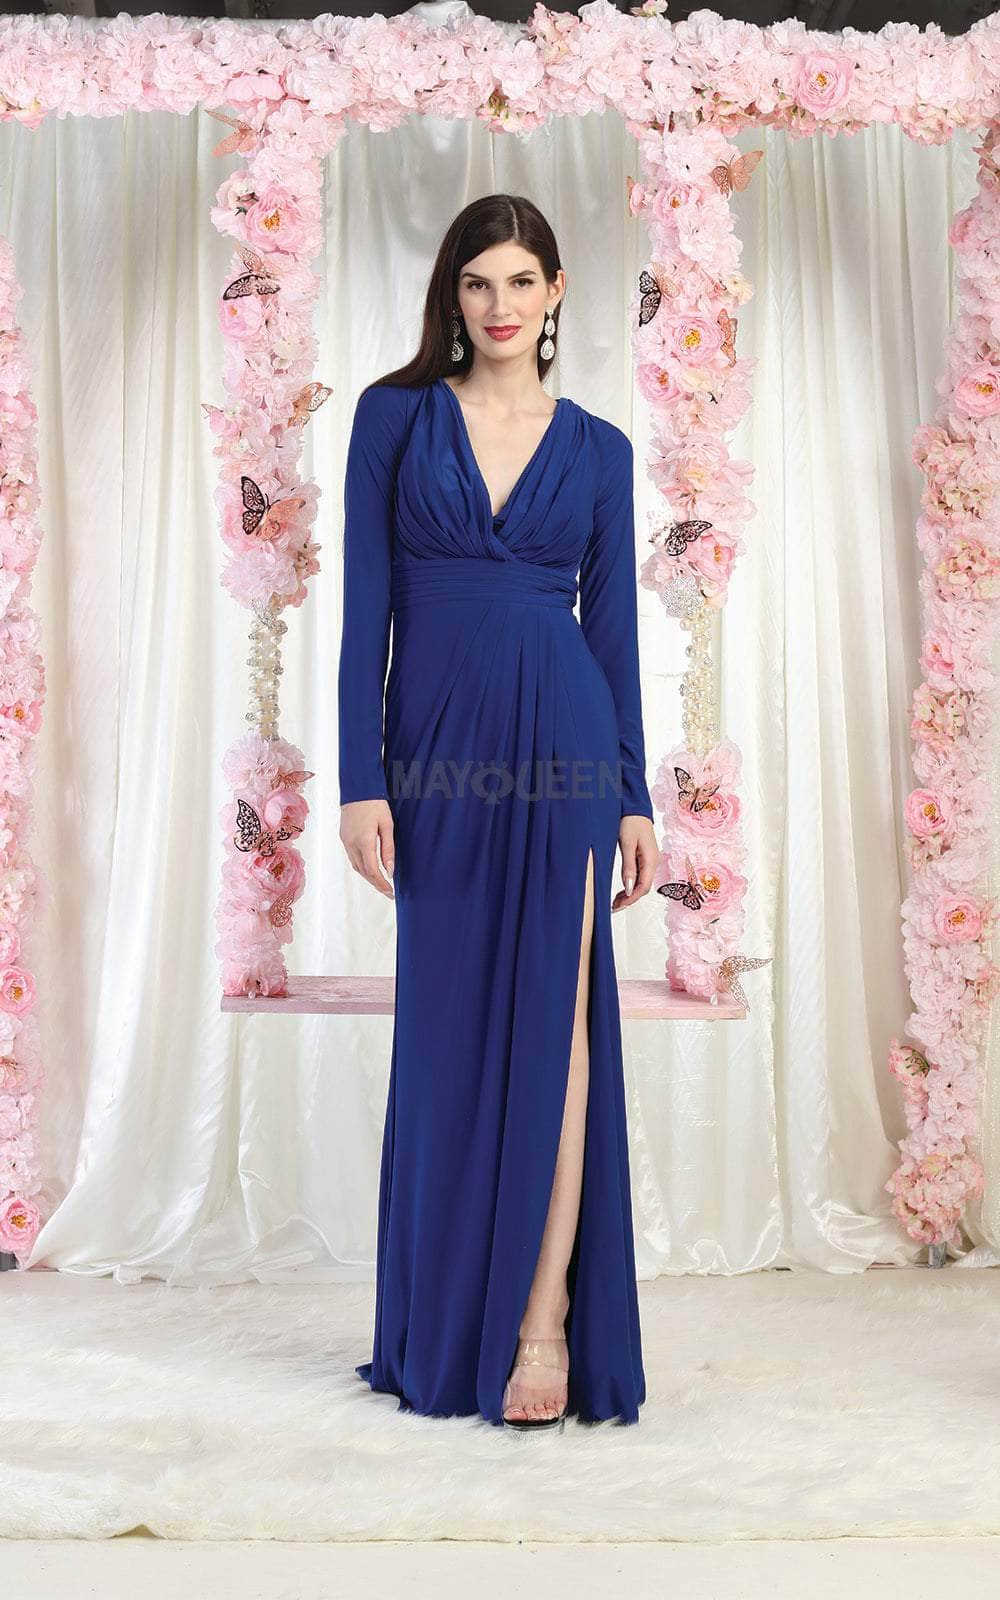 May Queen MQ1999 - Plunging Formal Evening Gown Special Occasion Dress